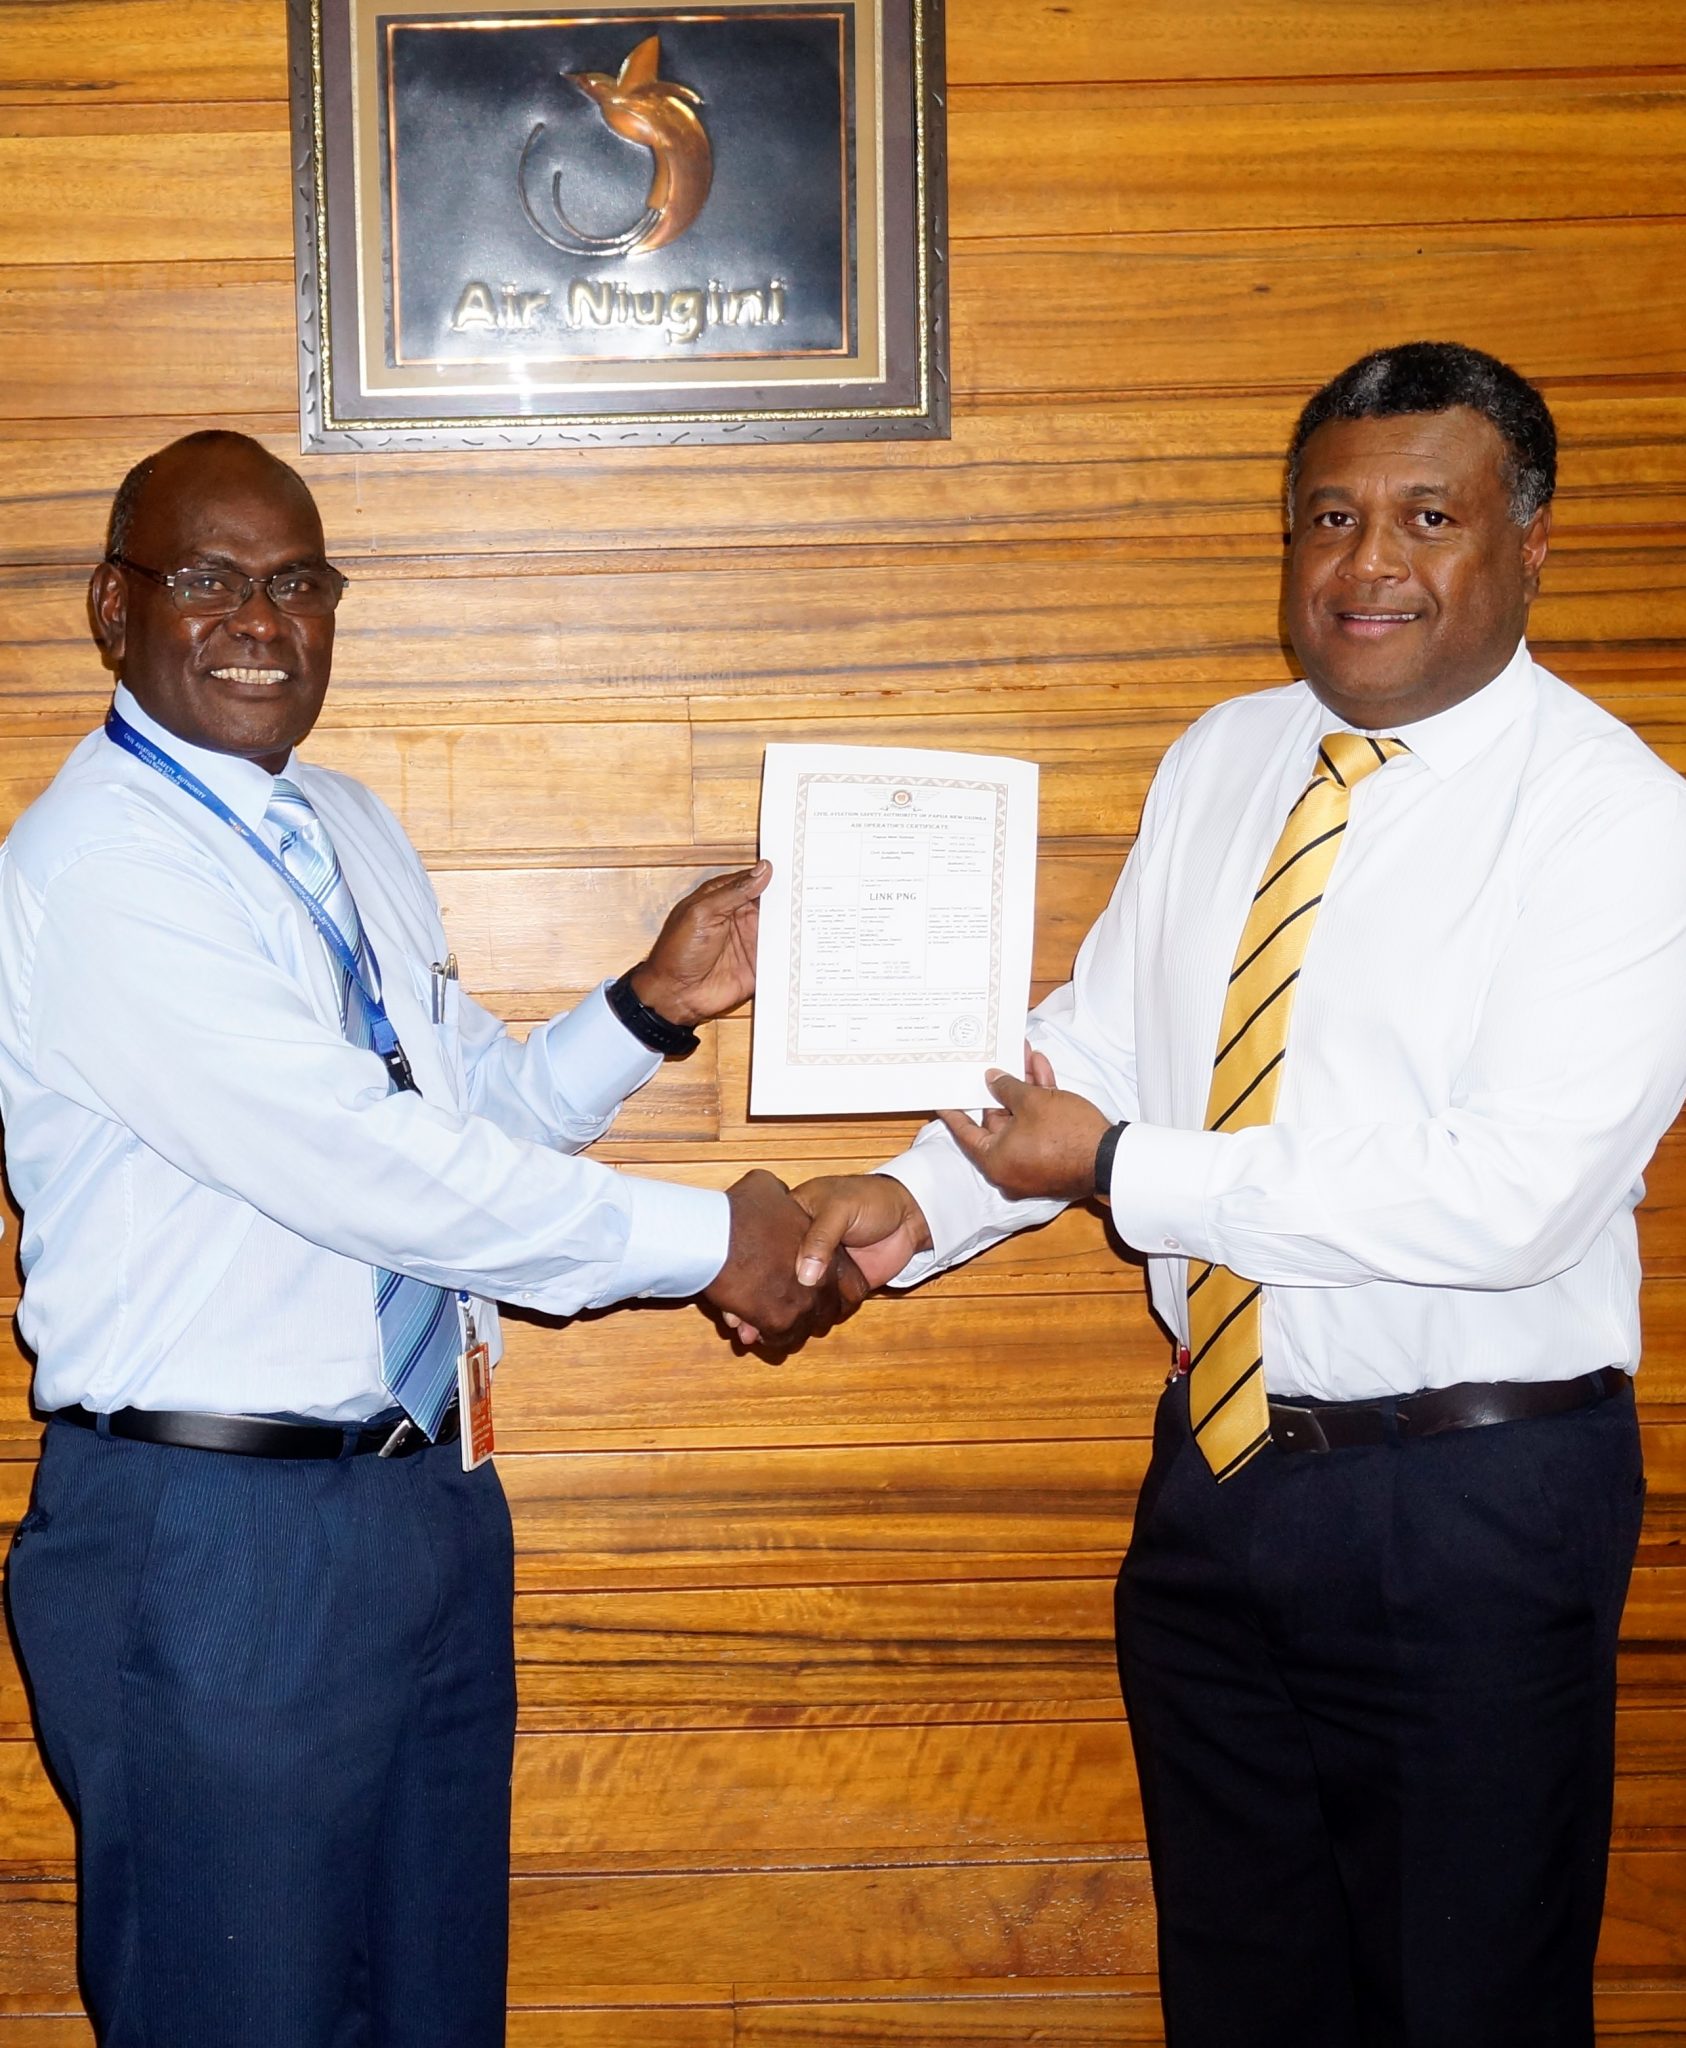 Link PNG presented with an Air Operator’s Certificate